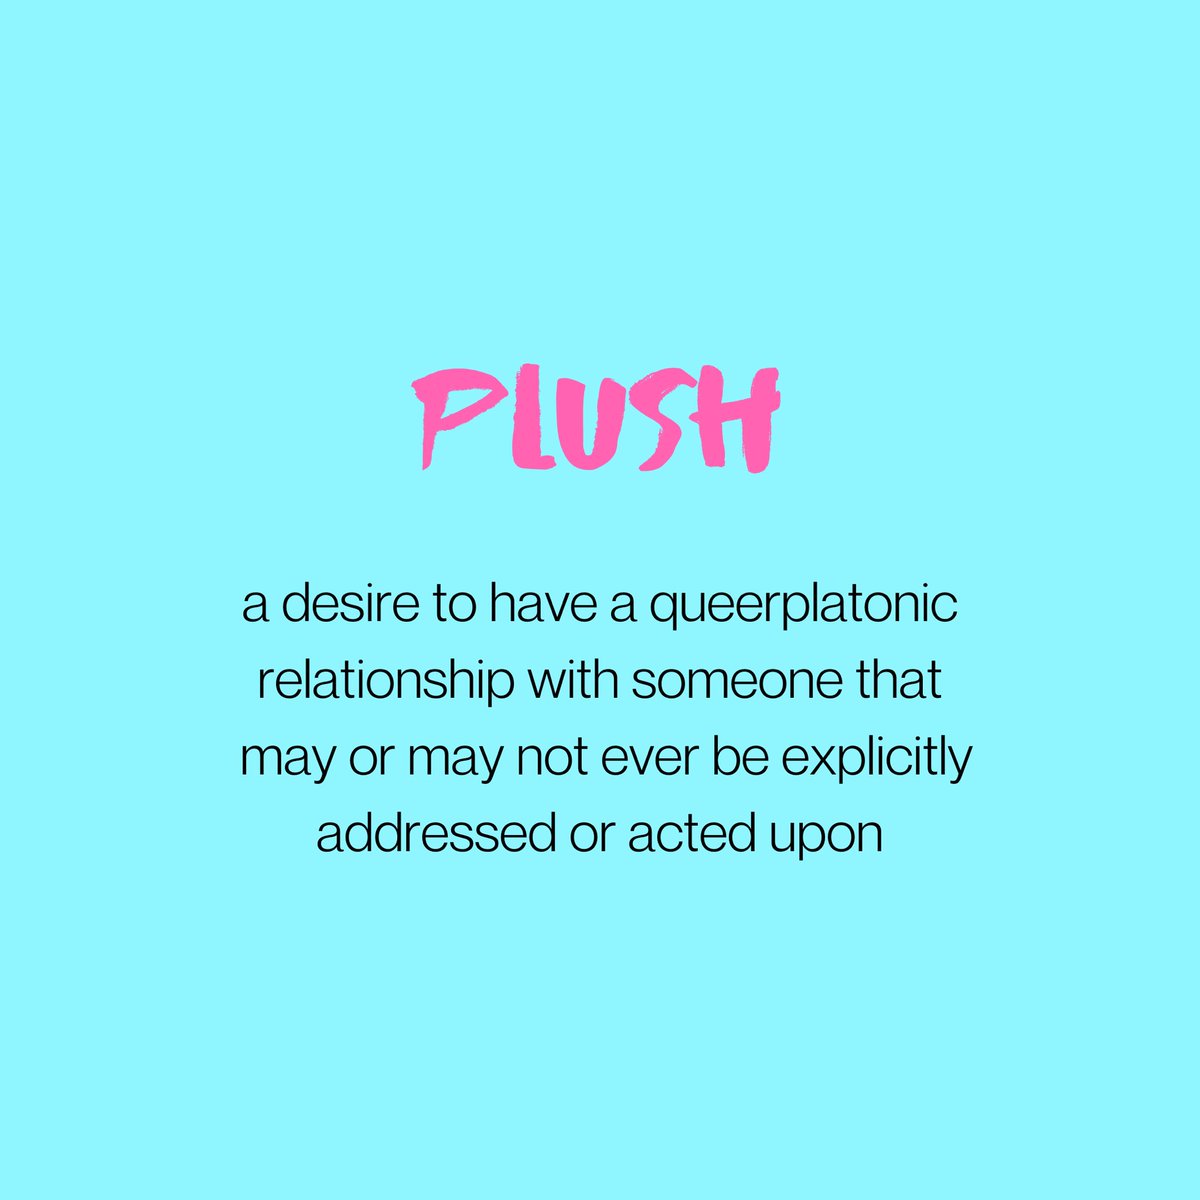 PLUSH: a desire to have a queerplatonic relationship with someone. may or may not ever be explicitly addressed or acted upon.